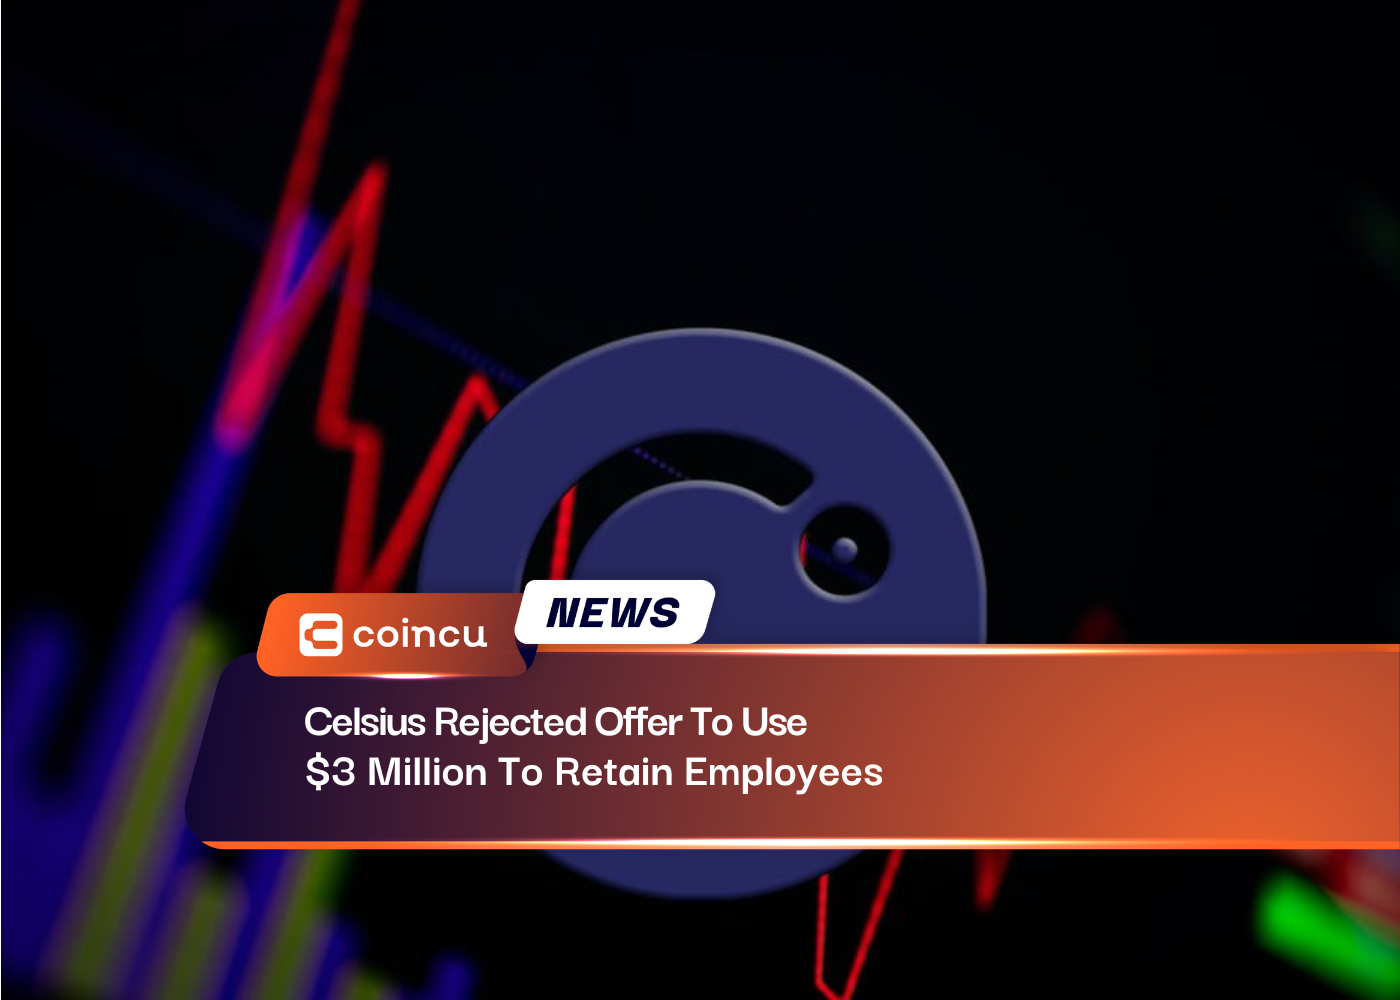 Celsius Rejected Offer To Use $3 Million To Retain Employees